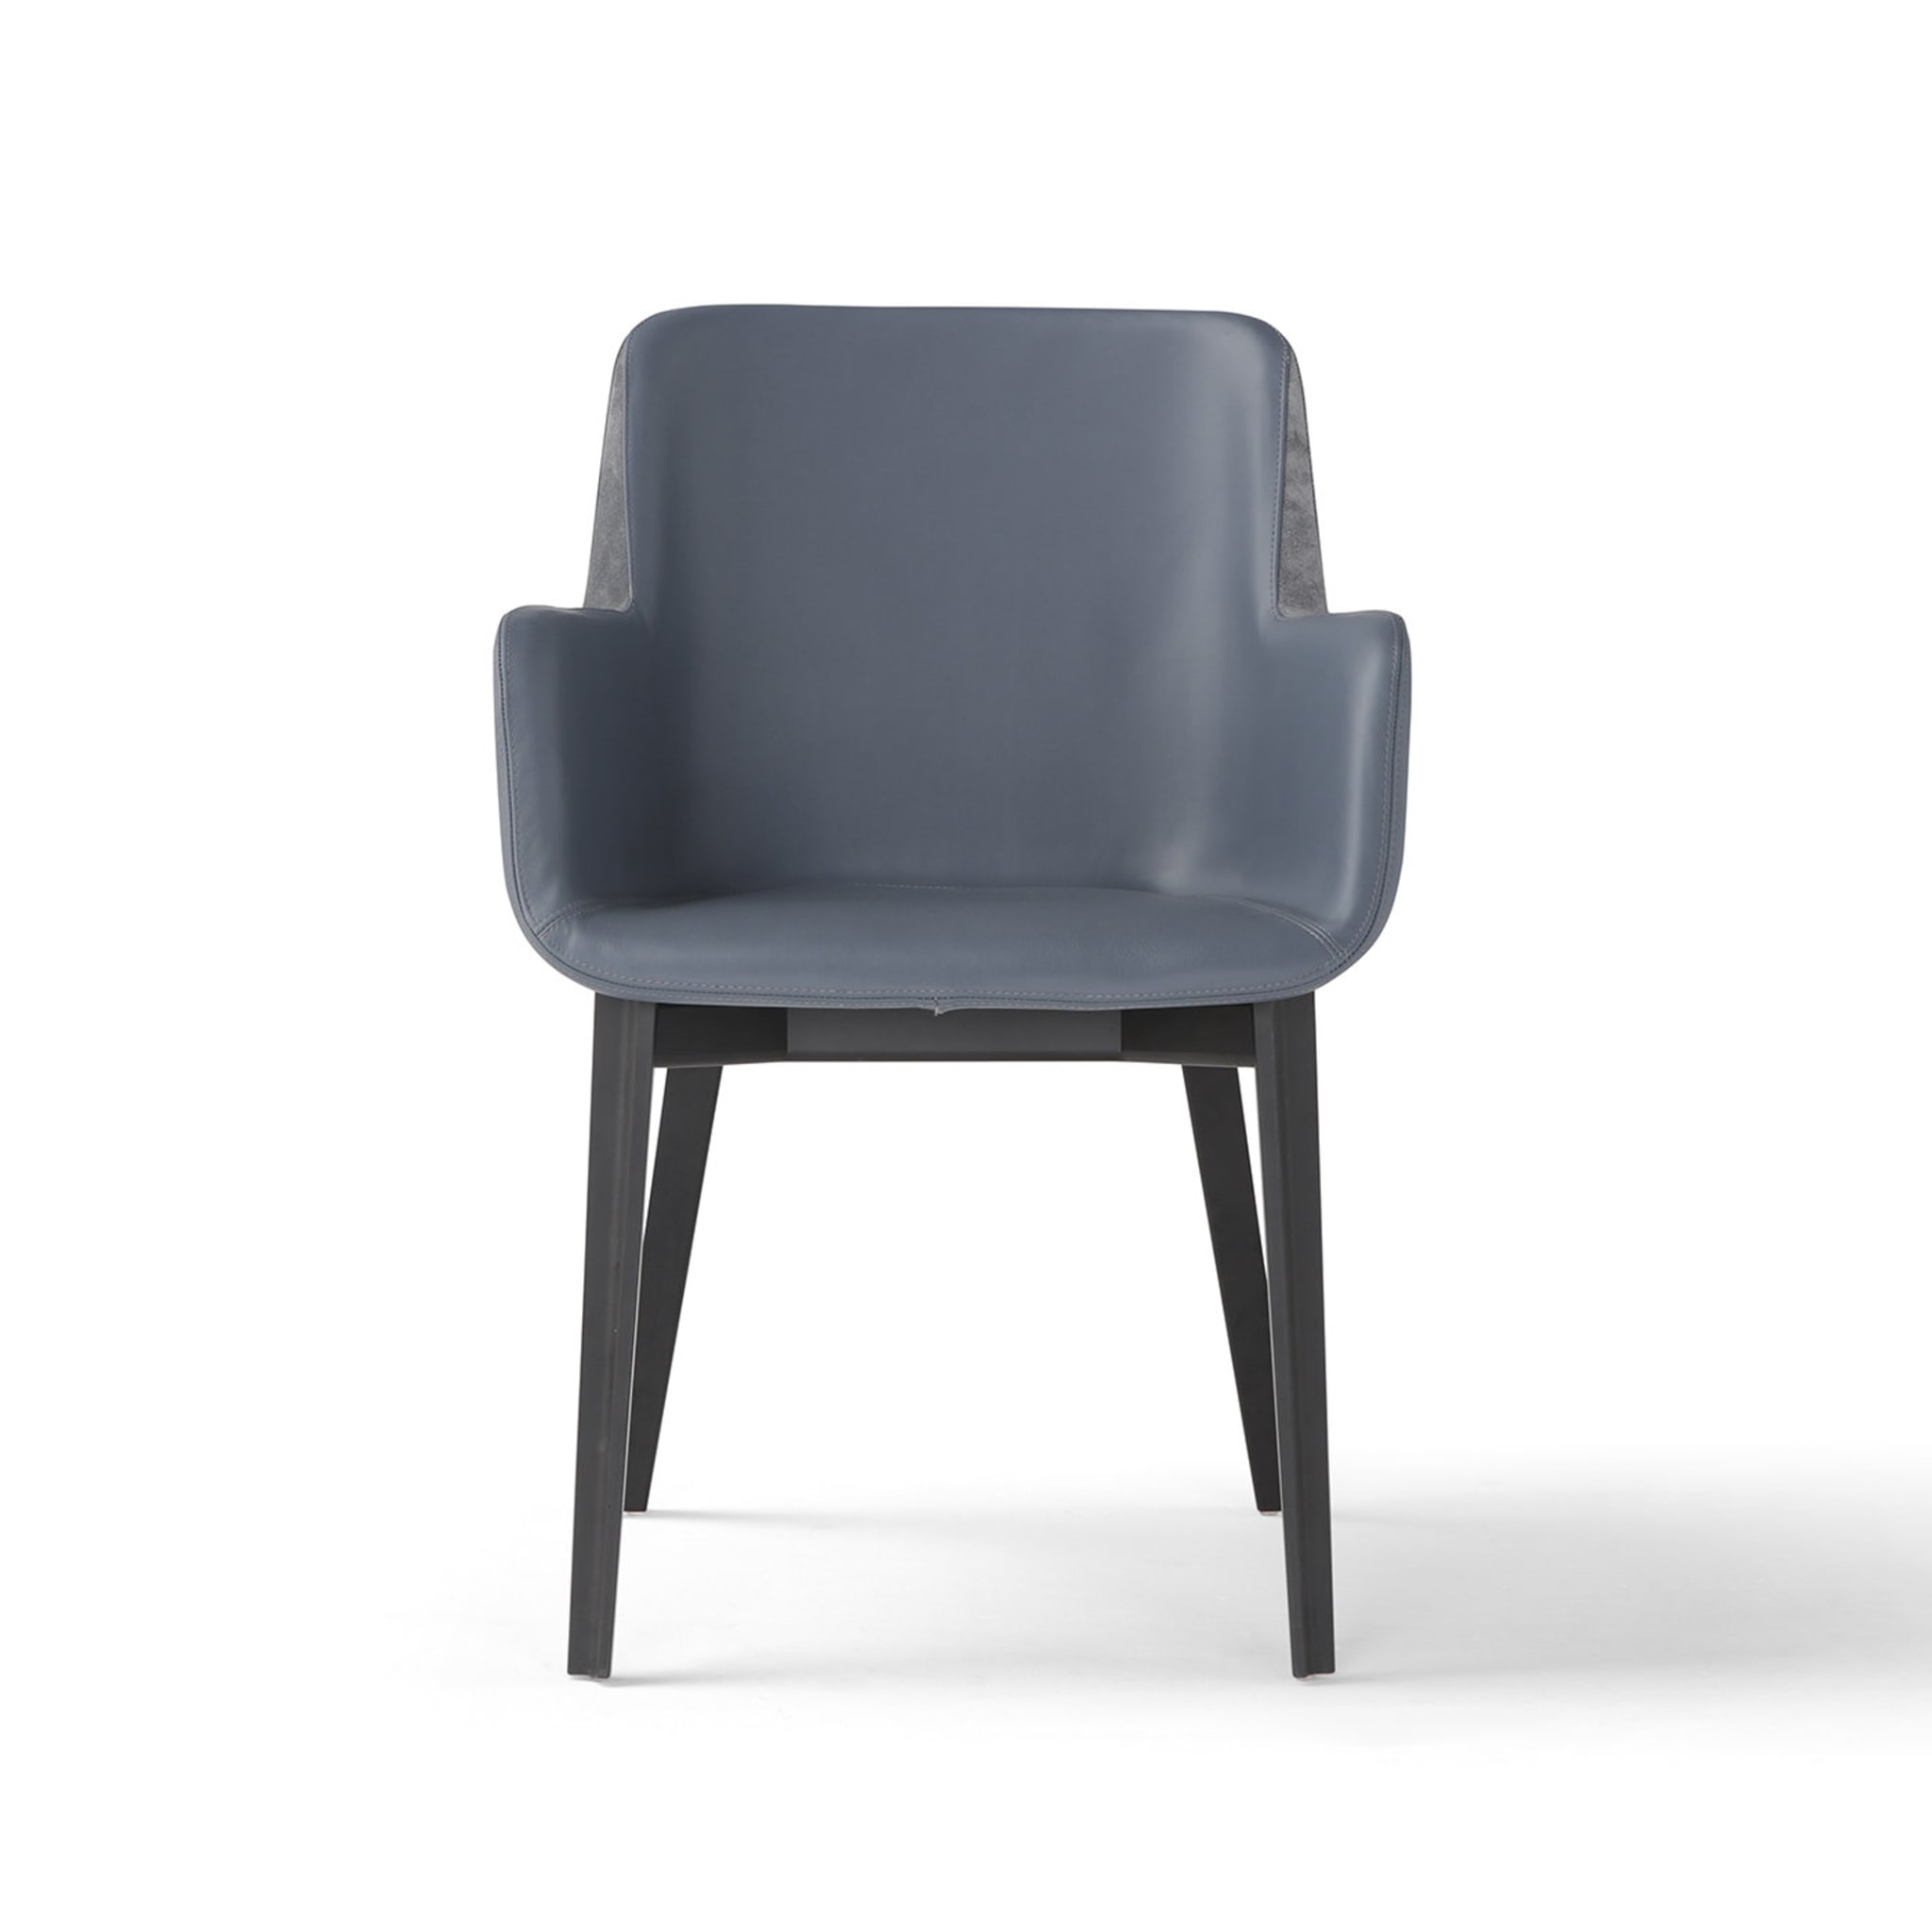 Panis Gray Leather Chair - Alternative view 1